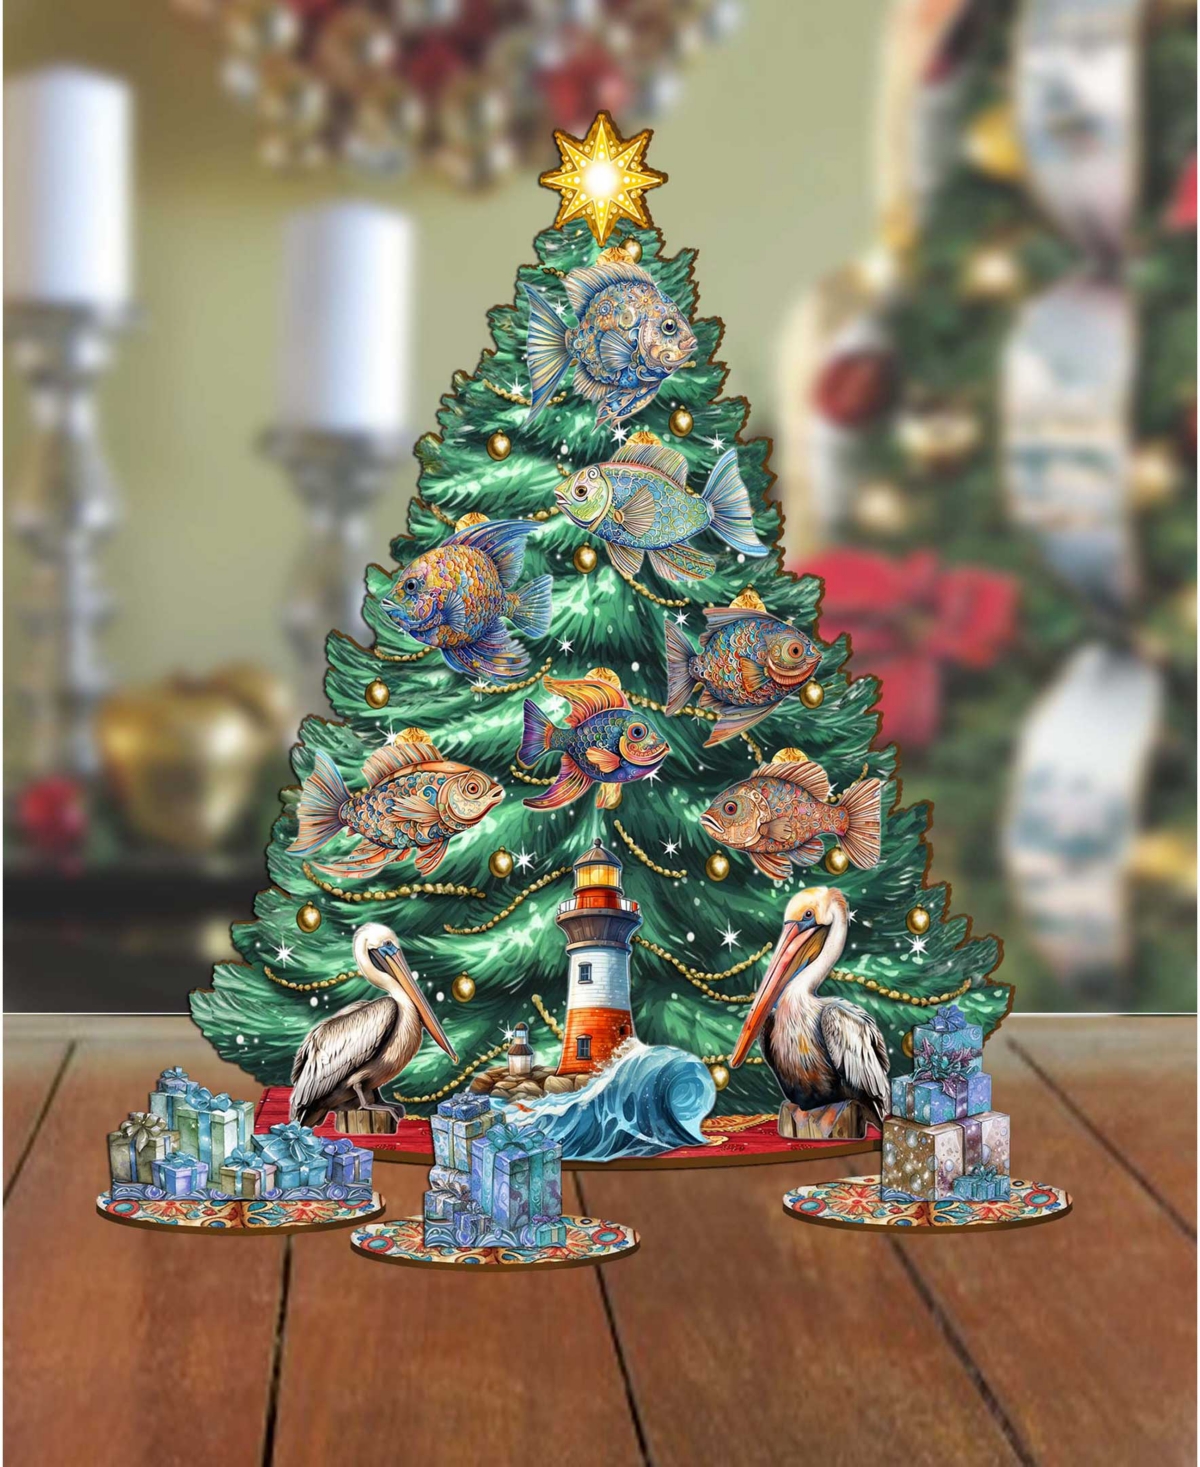 Shop Designocracy Coastal Themed Wooden Christmas Tree With Ornaments Set Of 13 G. Debrekht In Multi Color